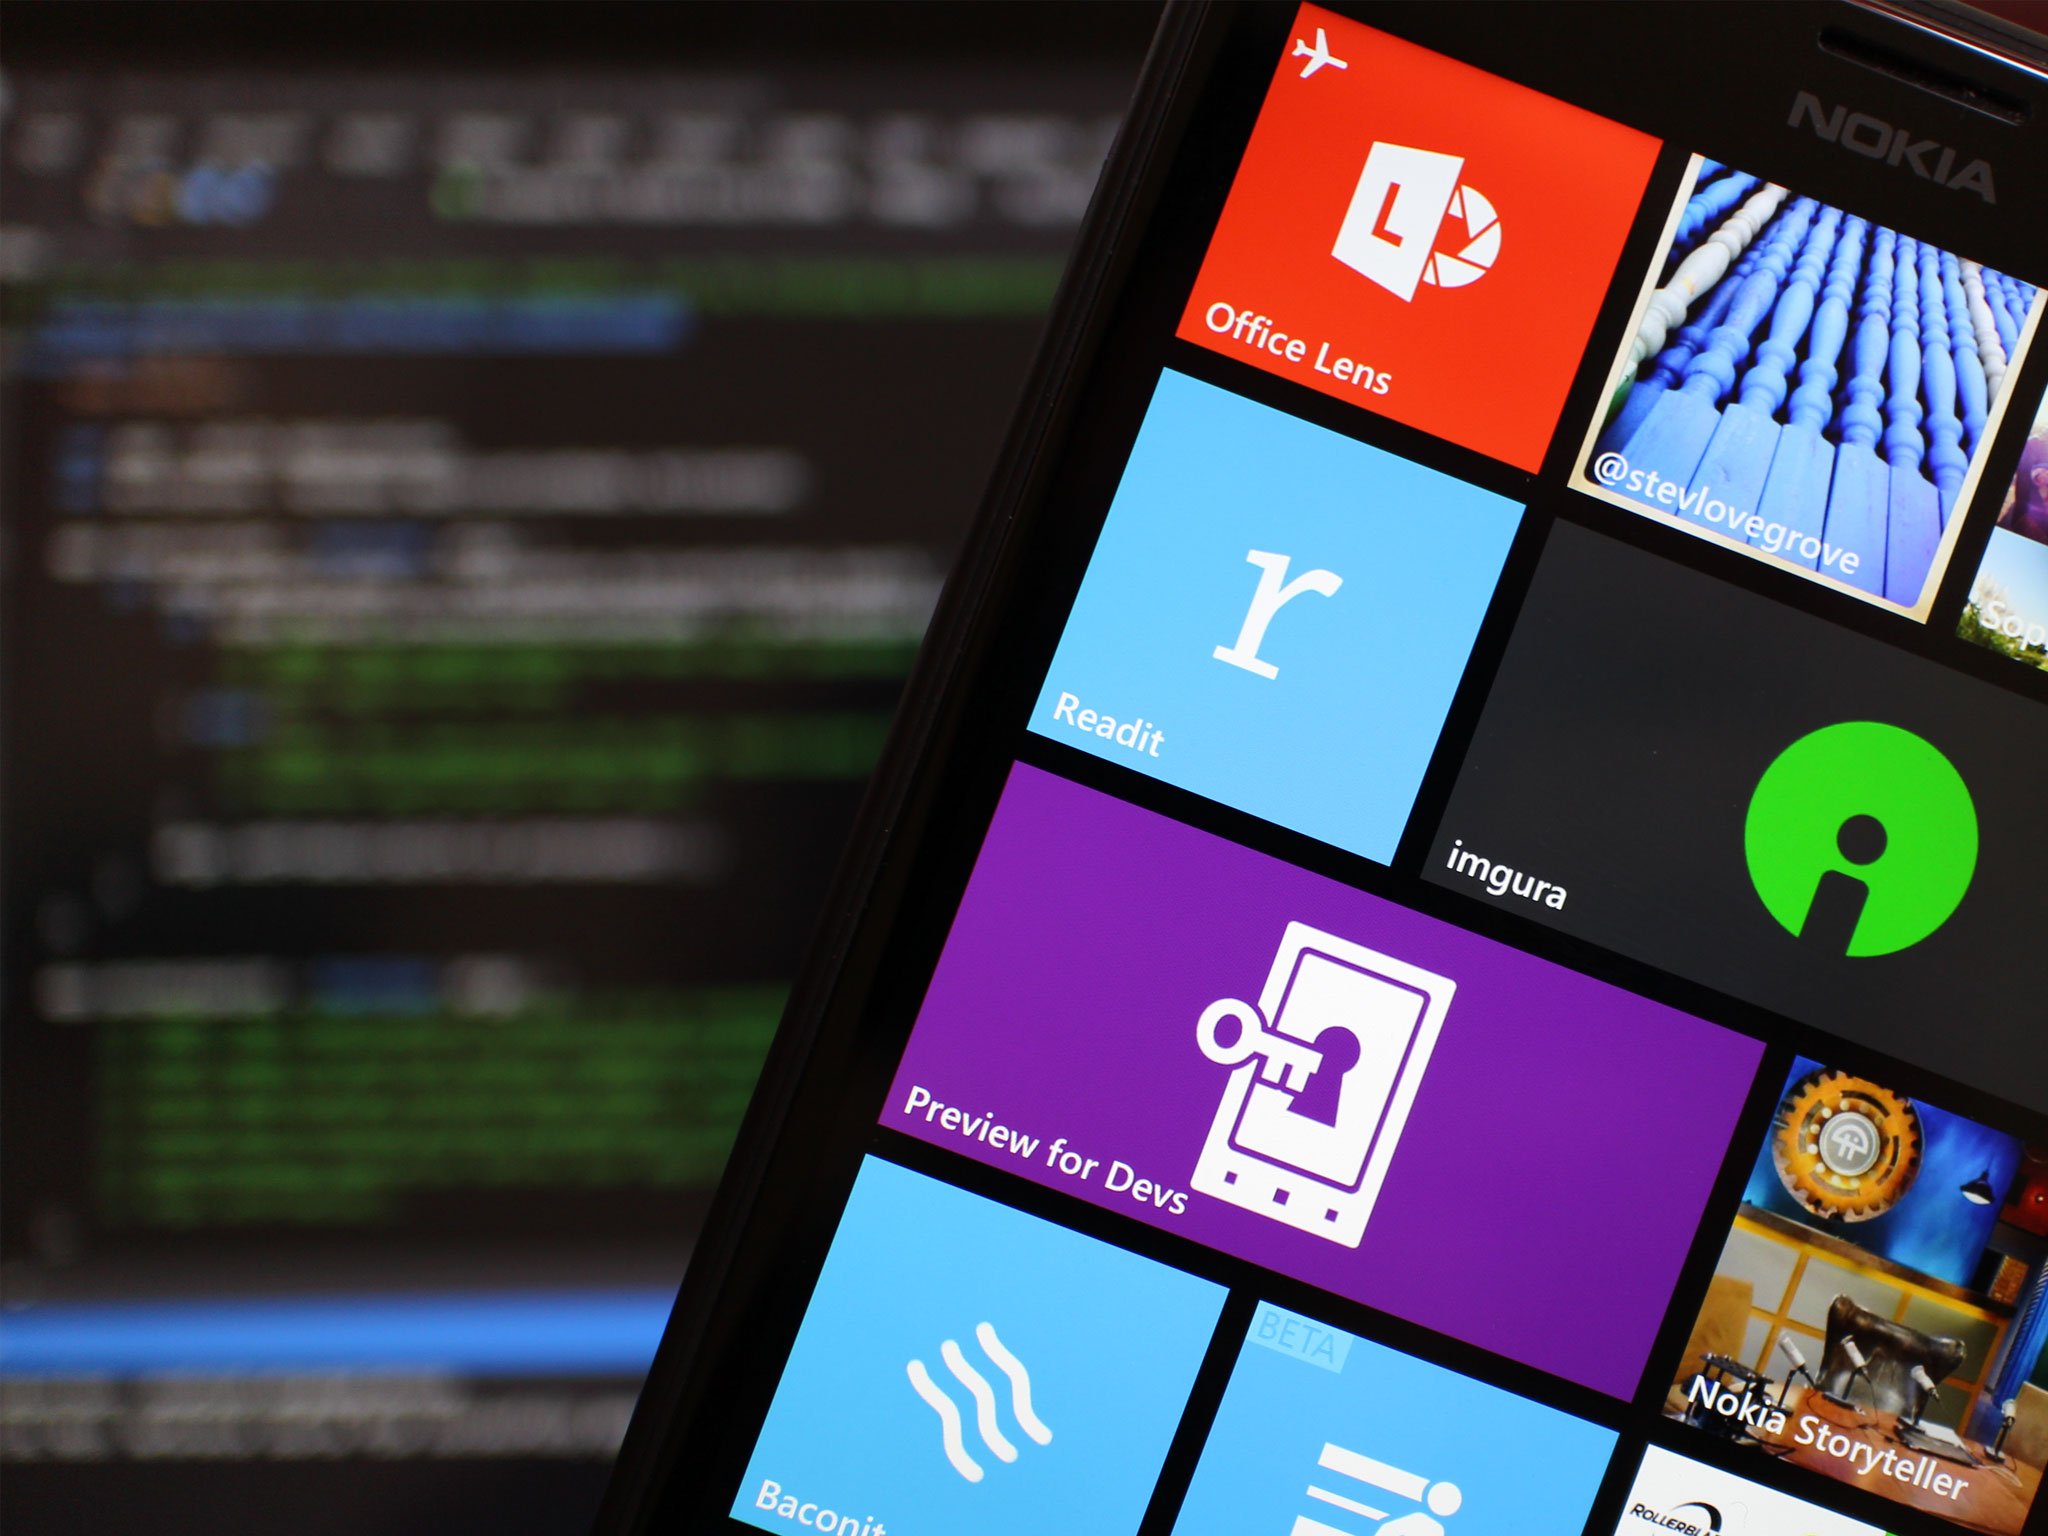 Preview_for_Developers_WP81.jpg